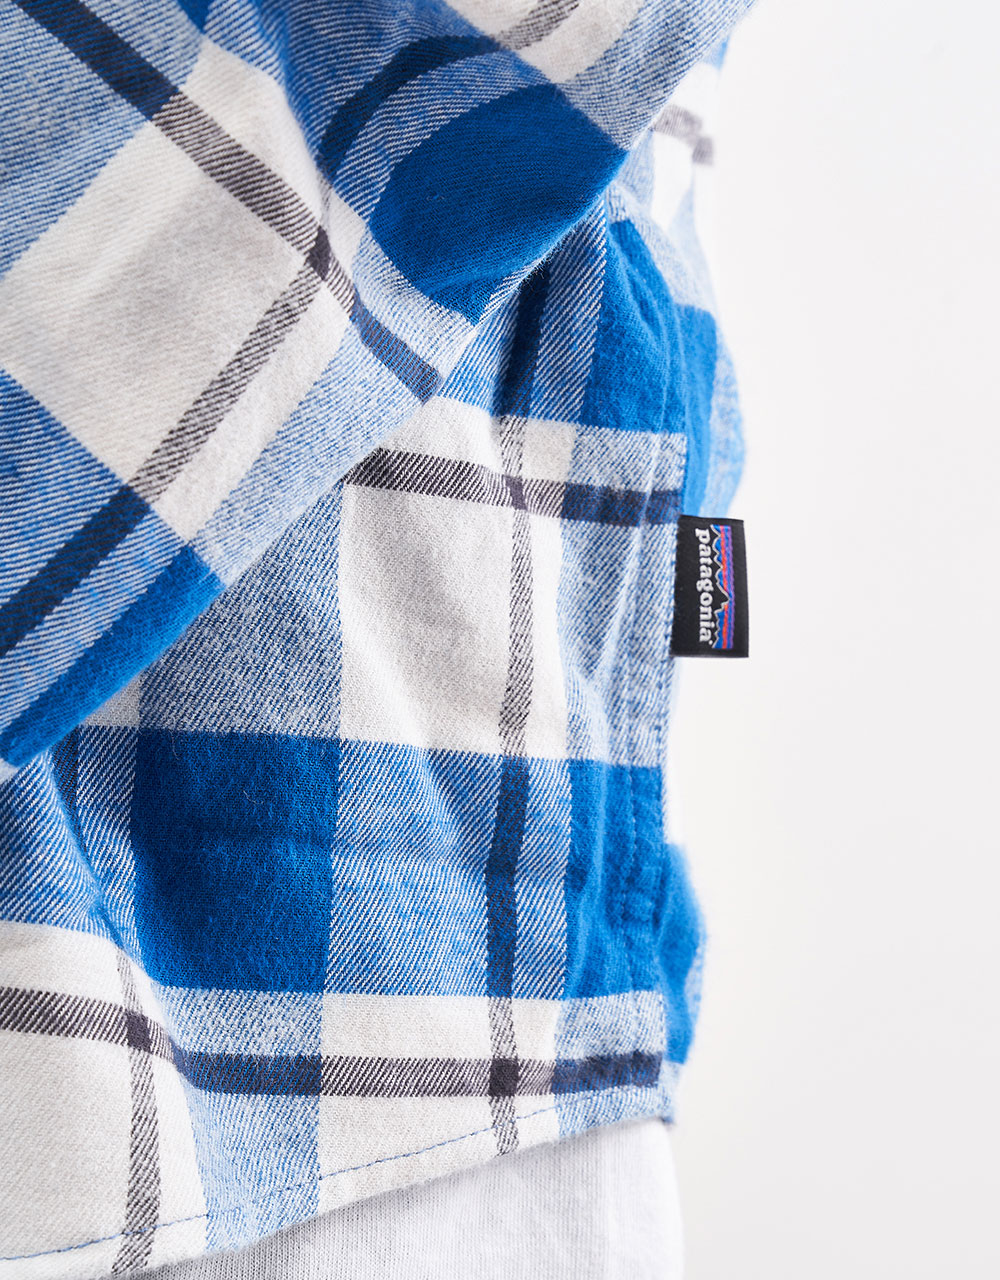 Patagonia Lightweight L/S Fjord Flannel Shirt - Captain: Endless Blue